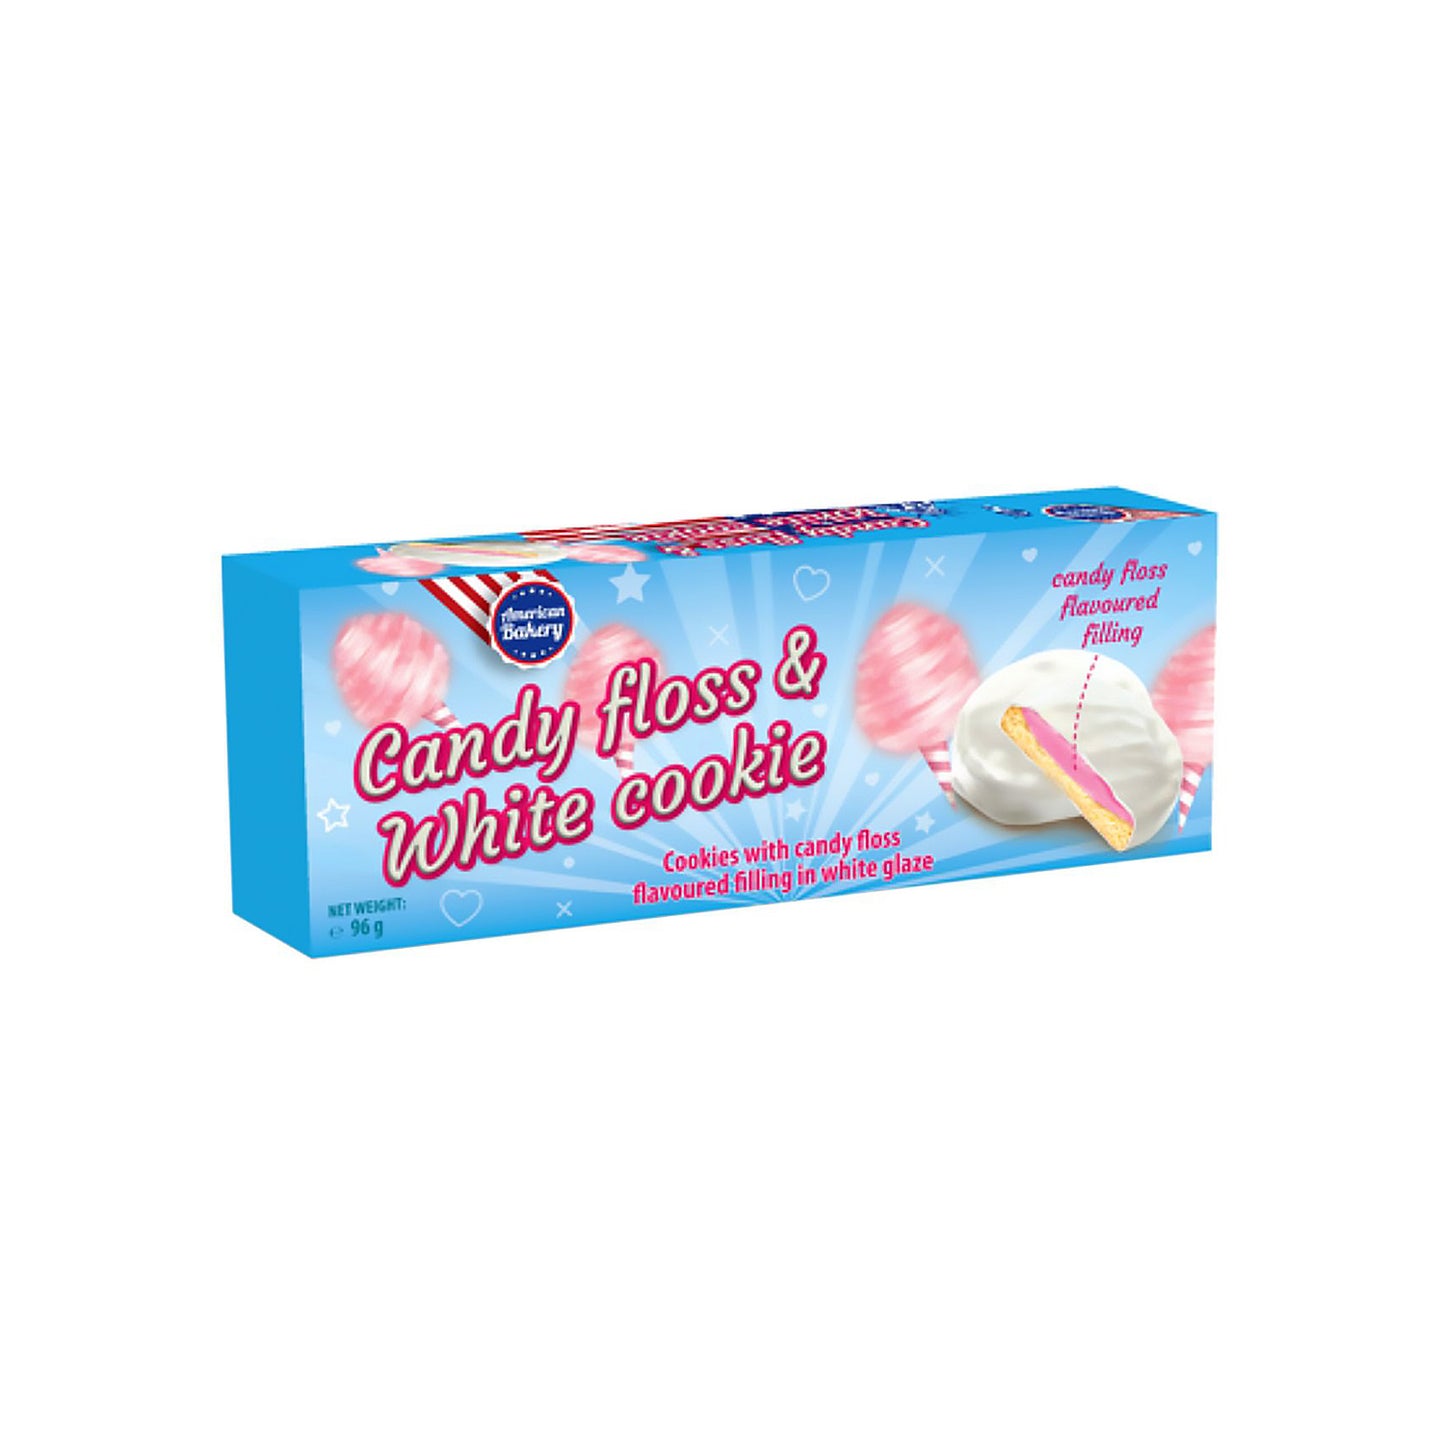 American Bakery Candy floss & White Cookie